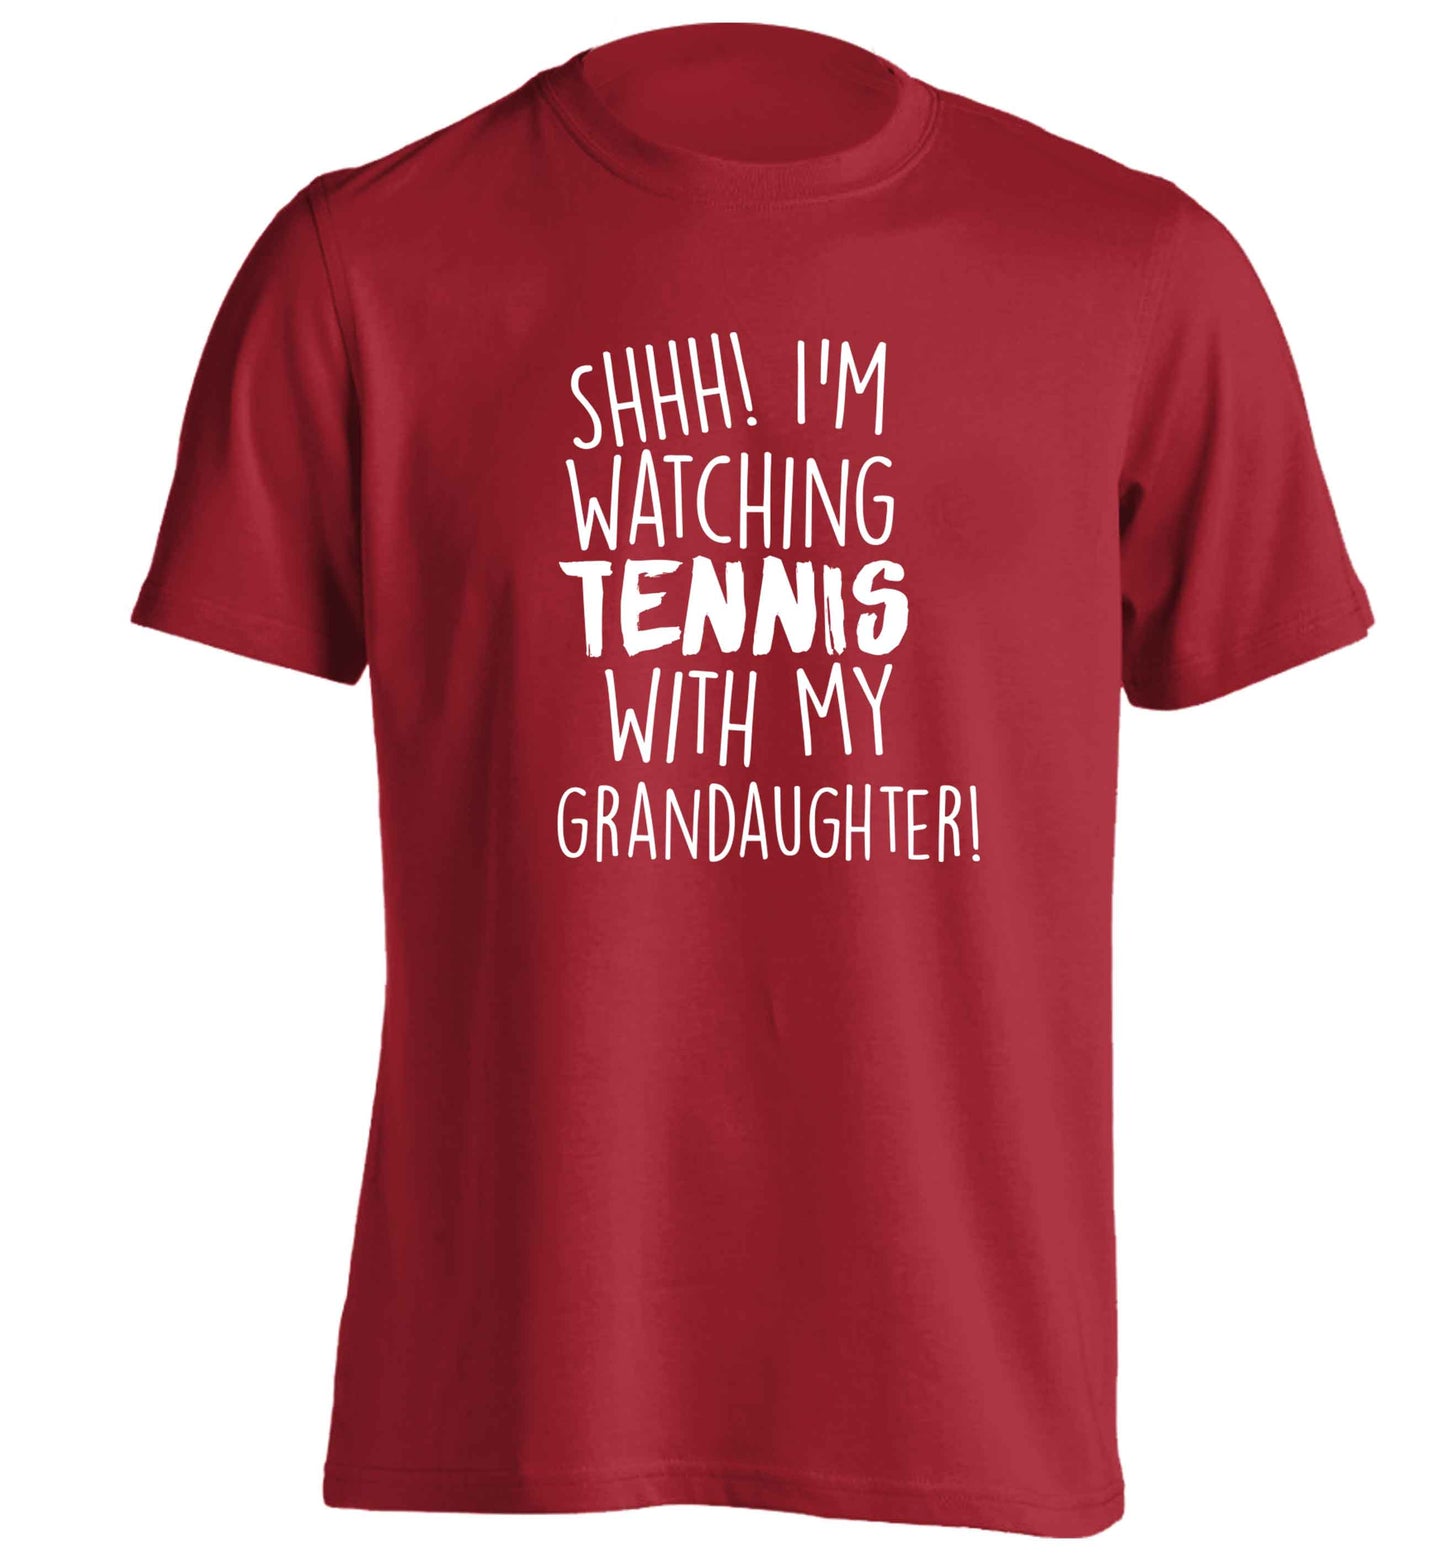 Shh! I'm watching tennis with my granddaughter! adults unisex red Tshirt 2XL